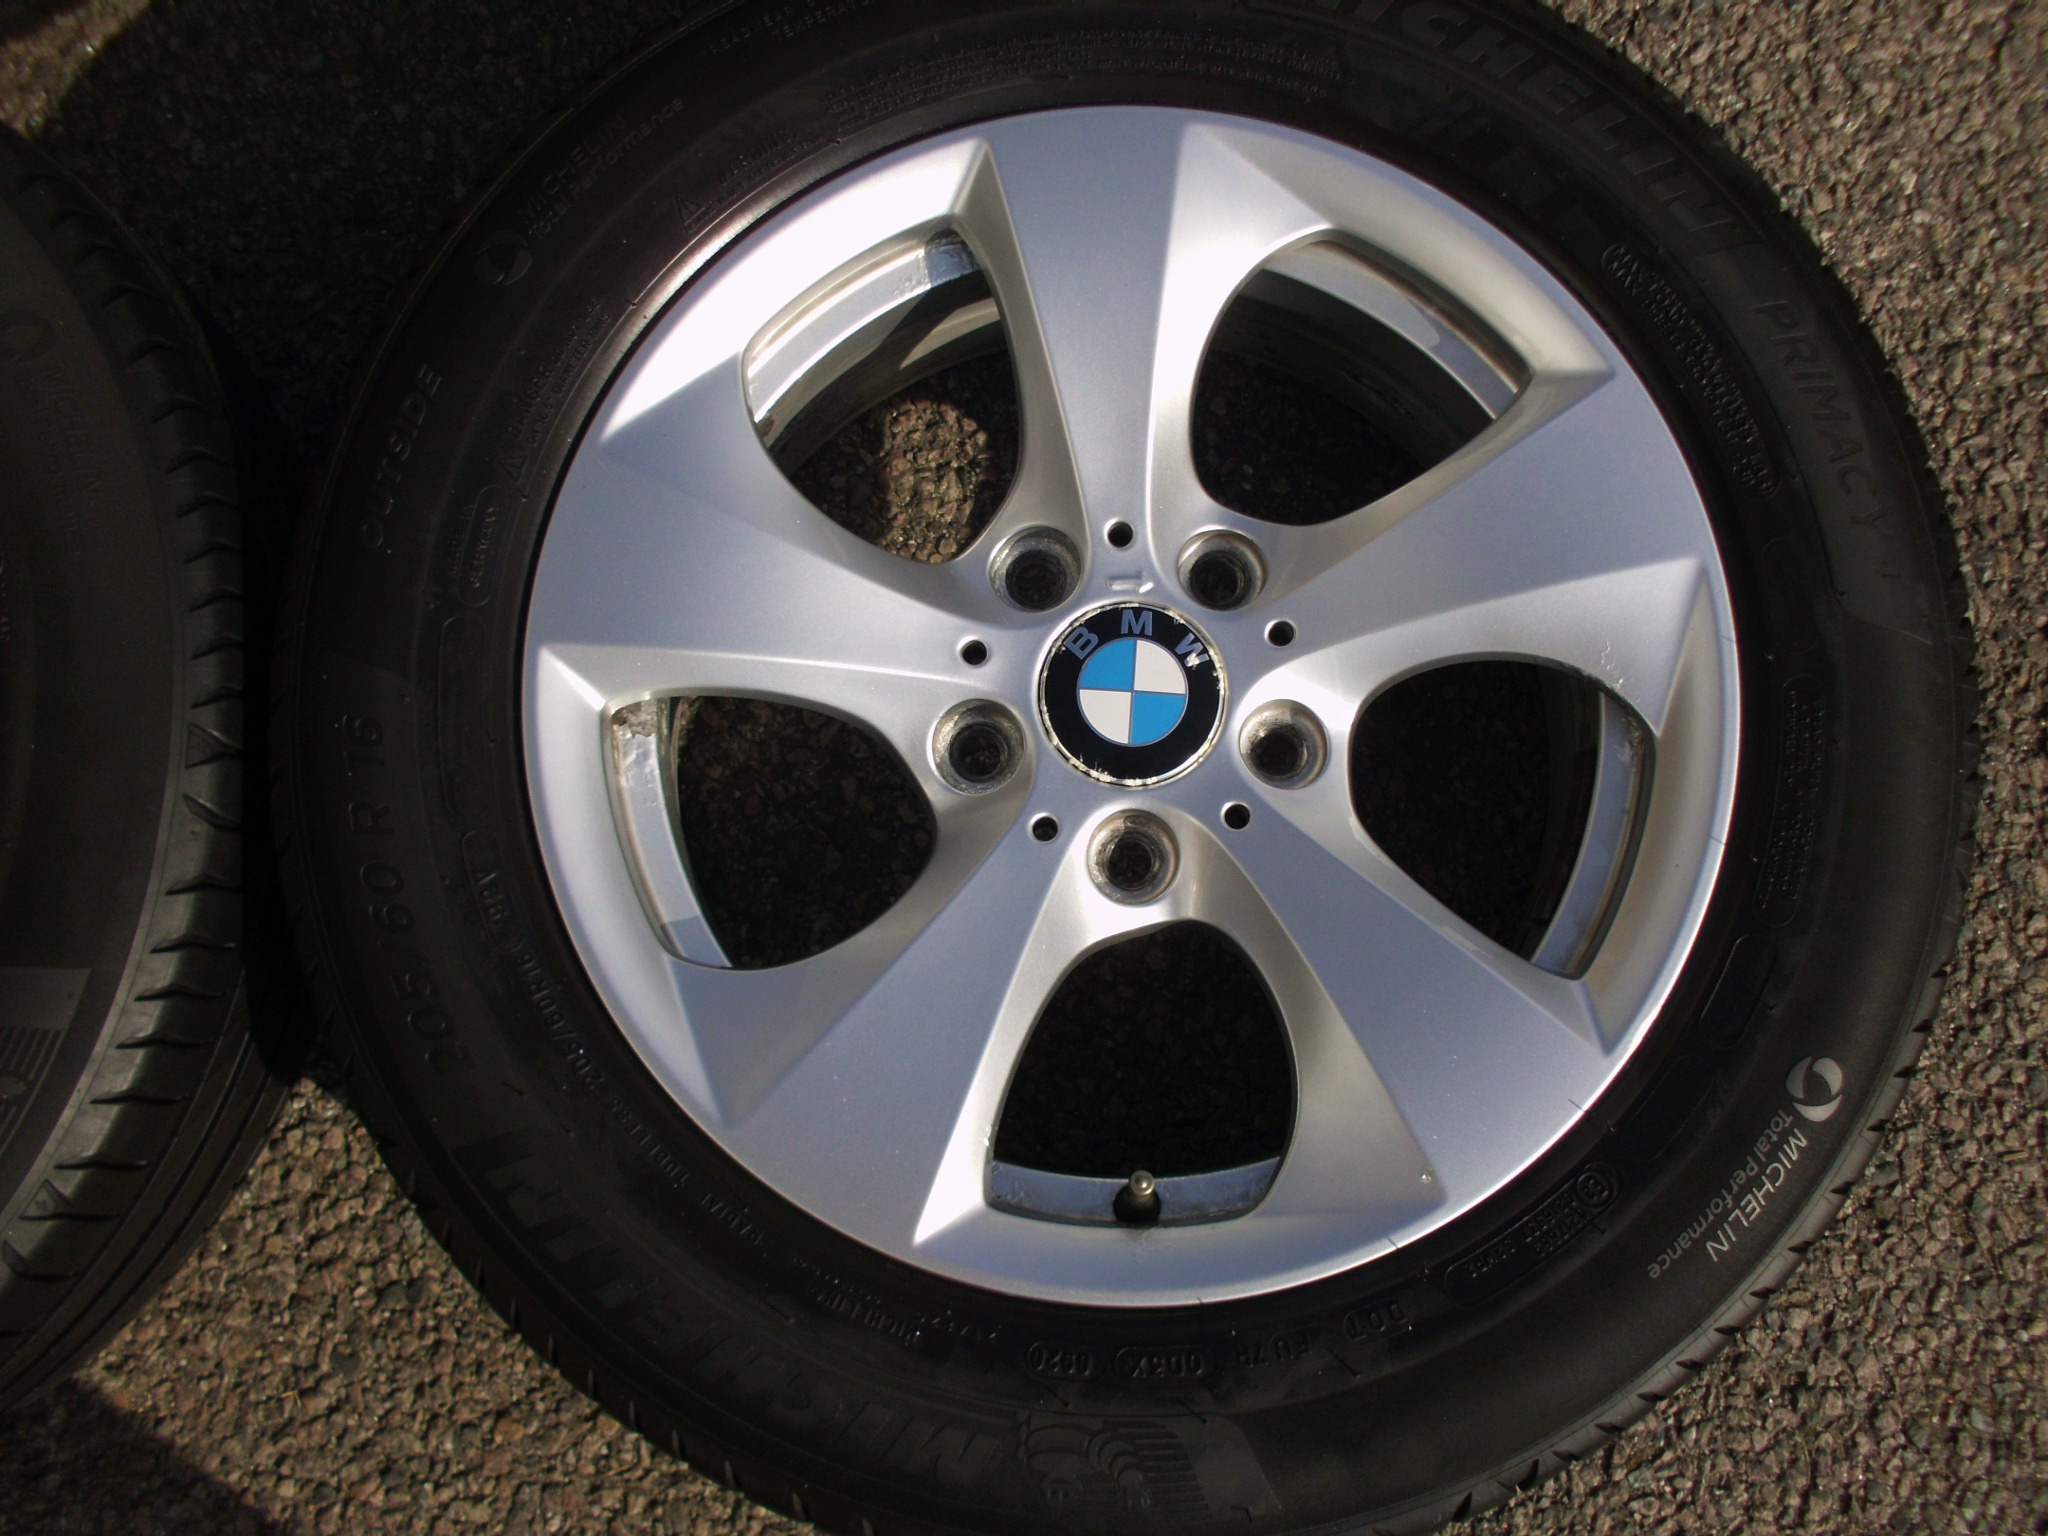 USED 16" GENUINE BMW STYLE 306 TURBINE DIRECTIONAL ALLOY WHEELS, CLEAN INC GOOD MICHELIN TYRES